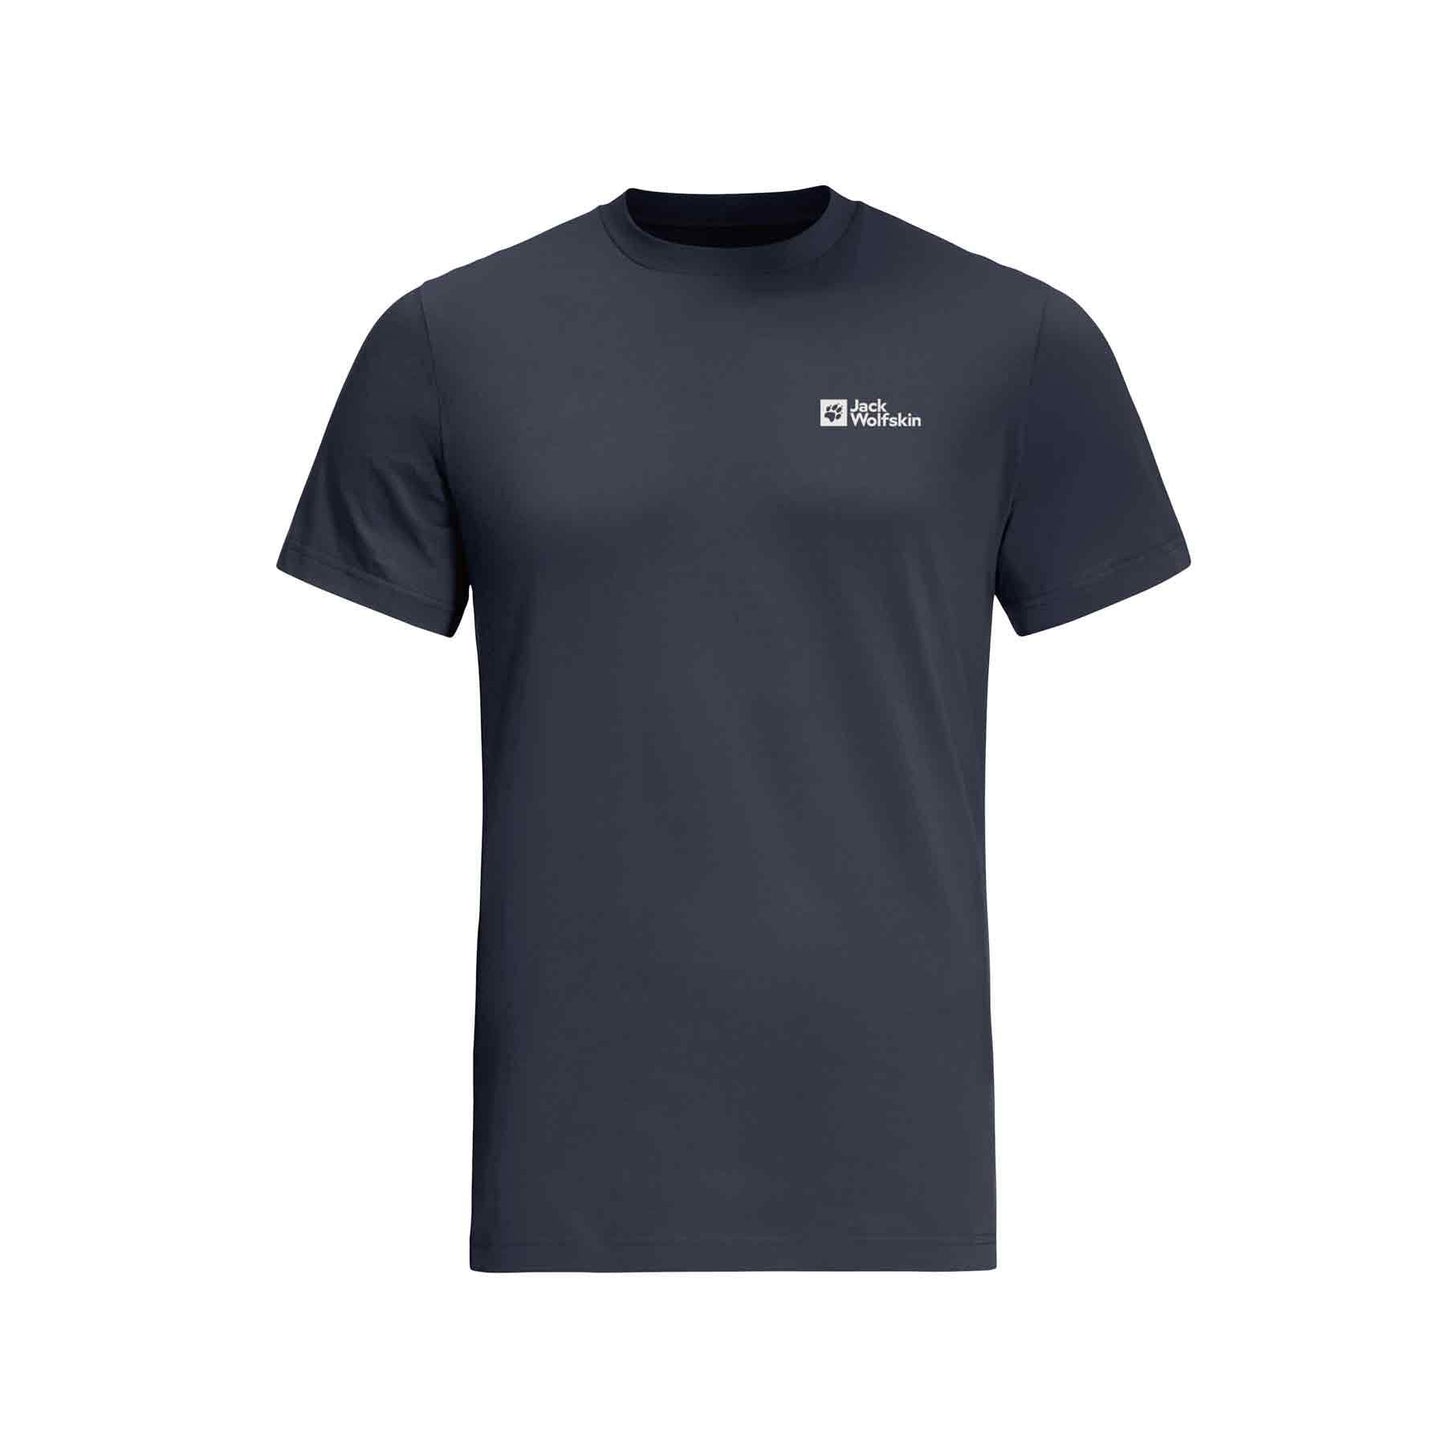 Men’s Essential T by Jack Wolfskin - The Luxury Promotional Gifts Company Limited